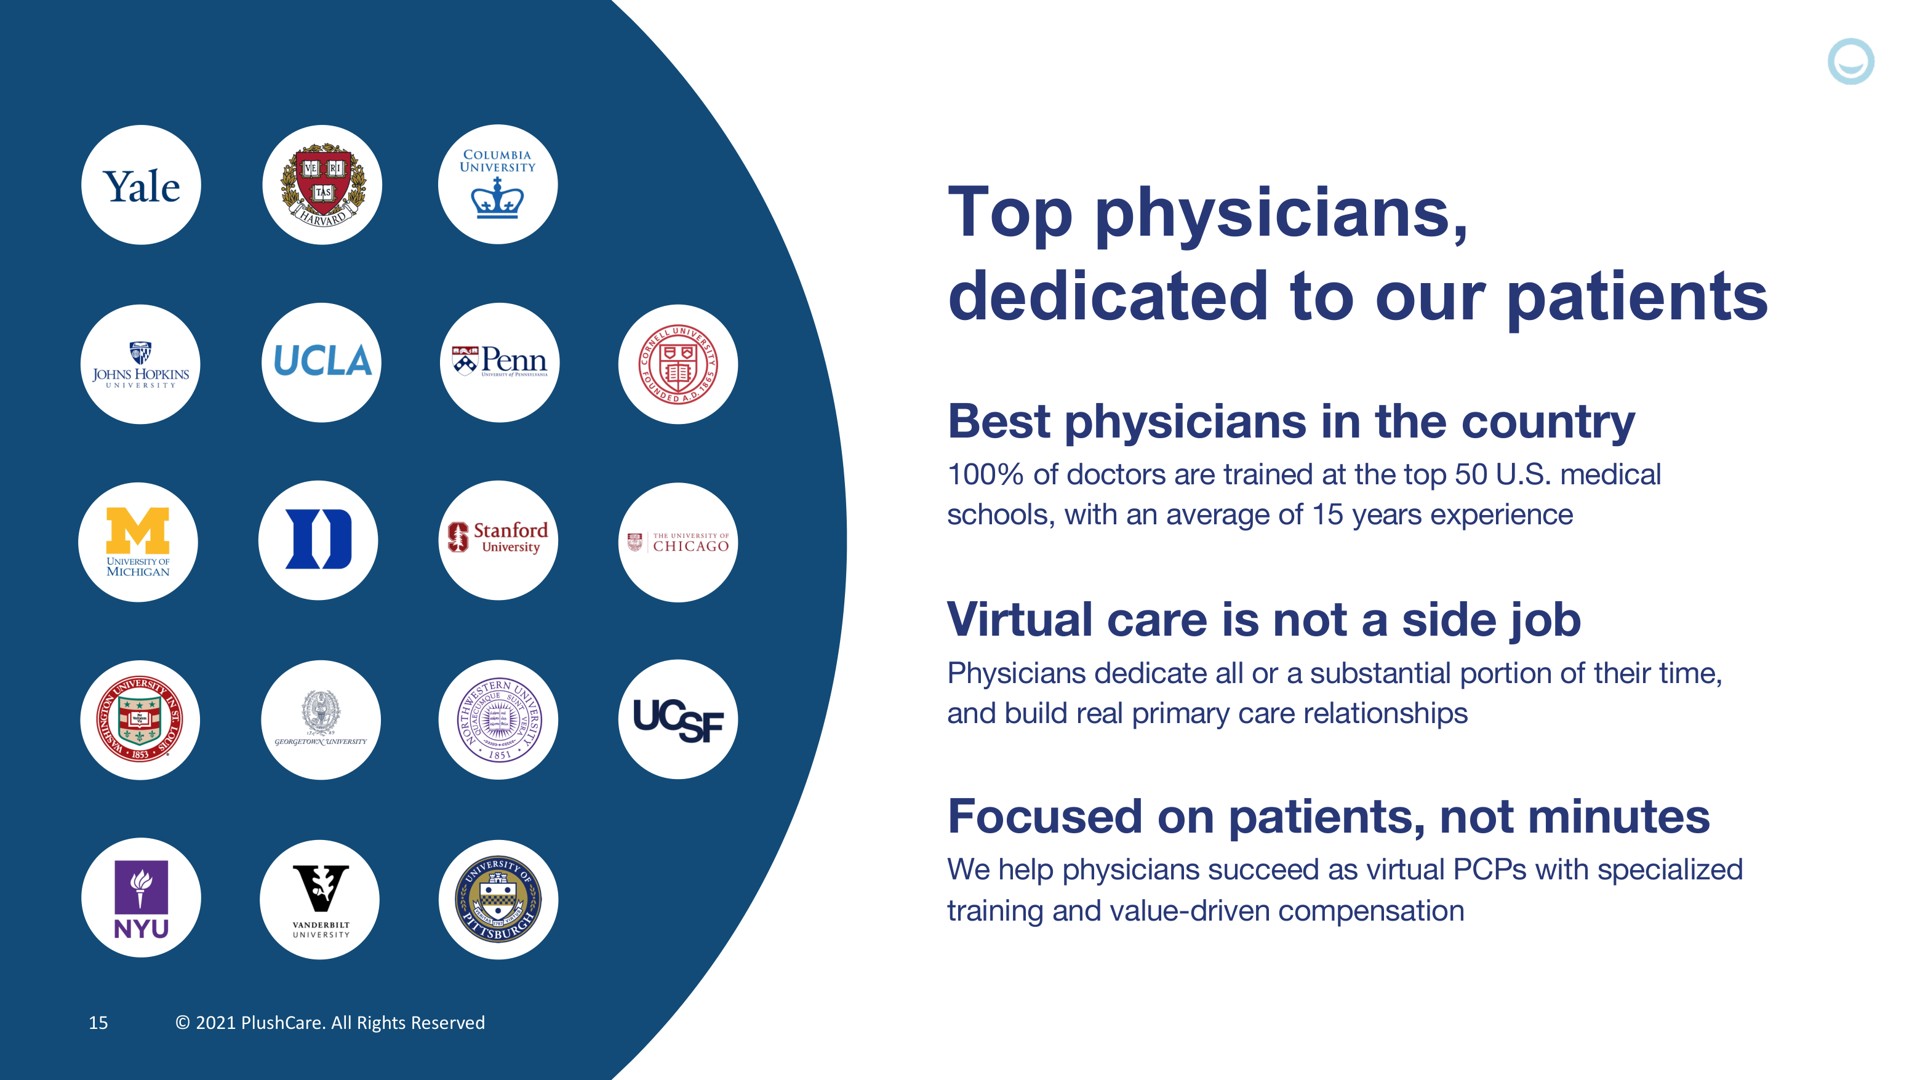 top physicians dedicated to our patients best physicians in the country virtual care is not a side job focused on patients not minutes | Accolade